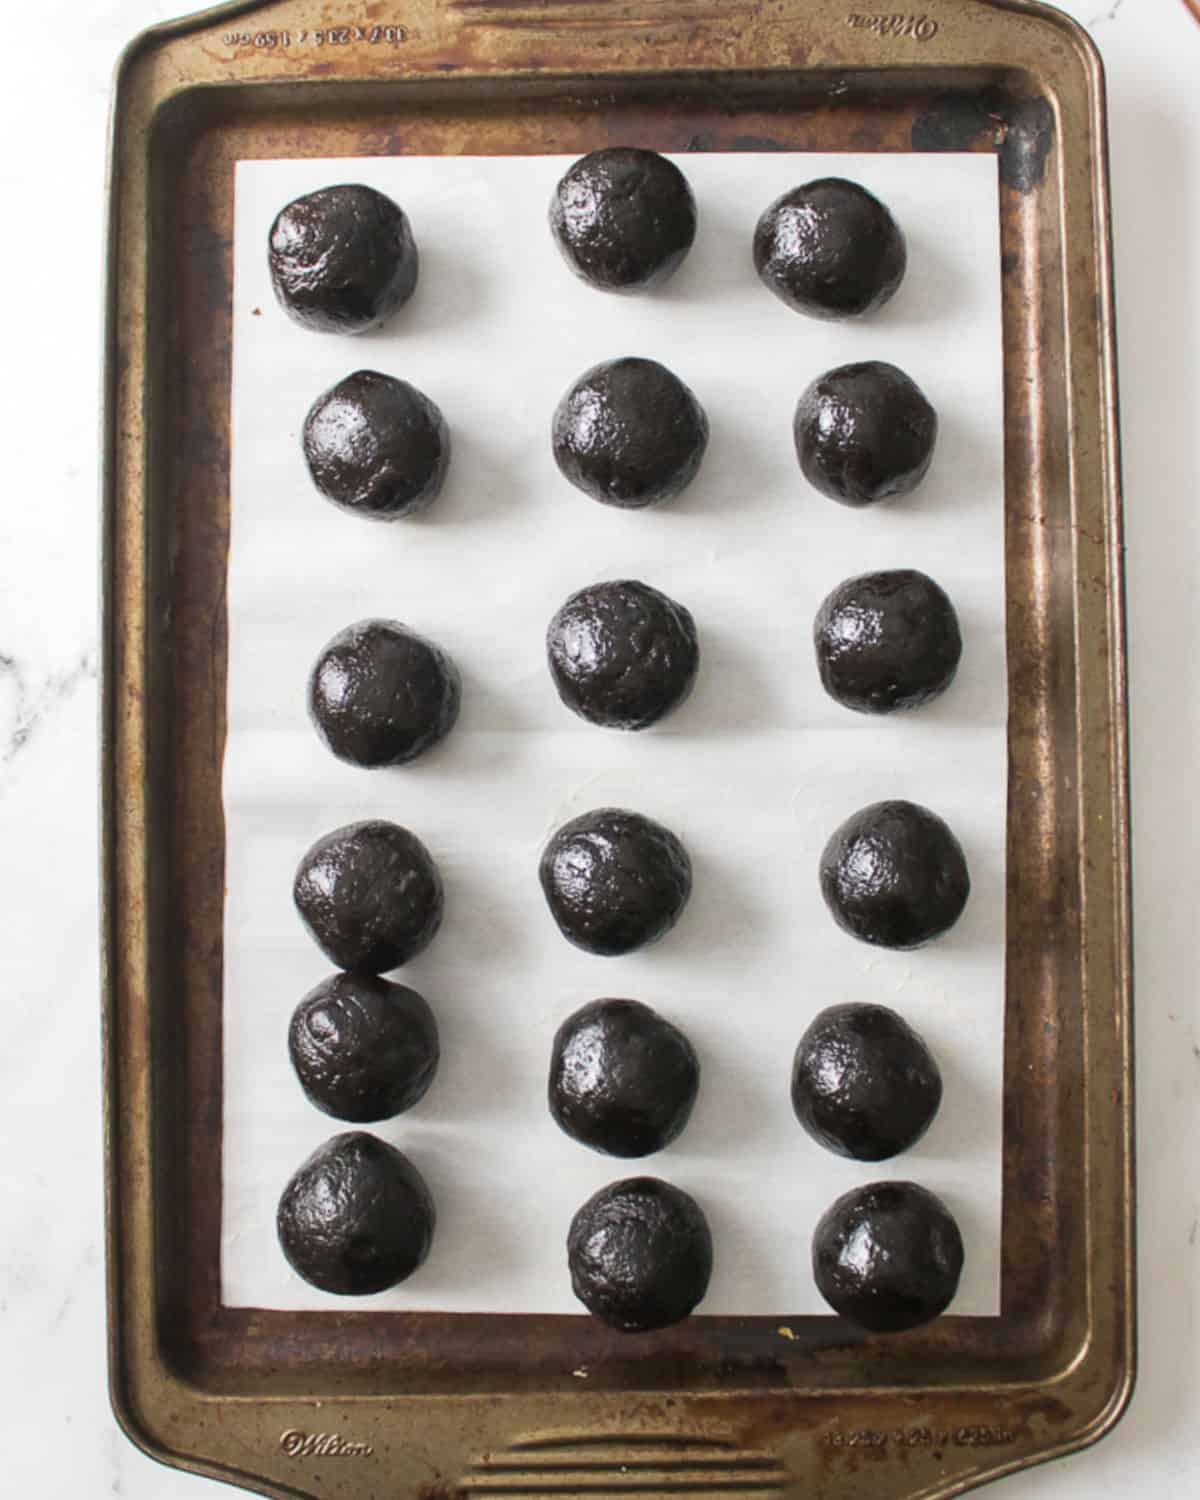 Metal tray with white parchment paper with oreo truffle balls.